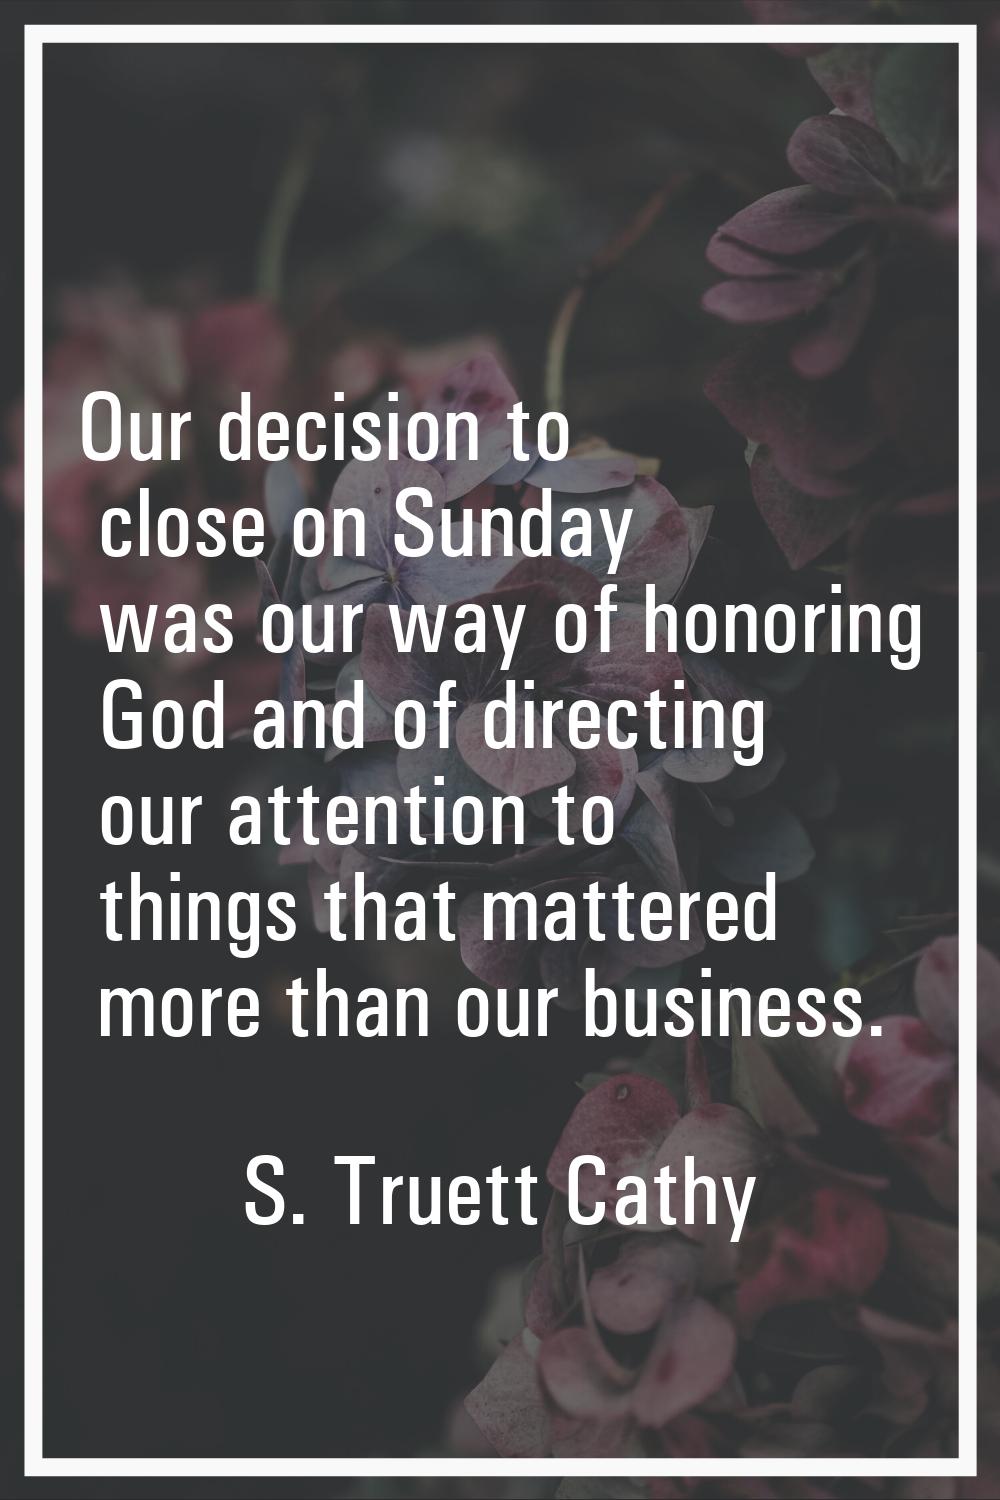 Our decision to close on Sunday was our way of honoring God and of directing our attention to thing